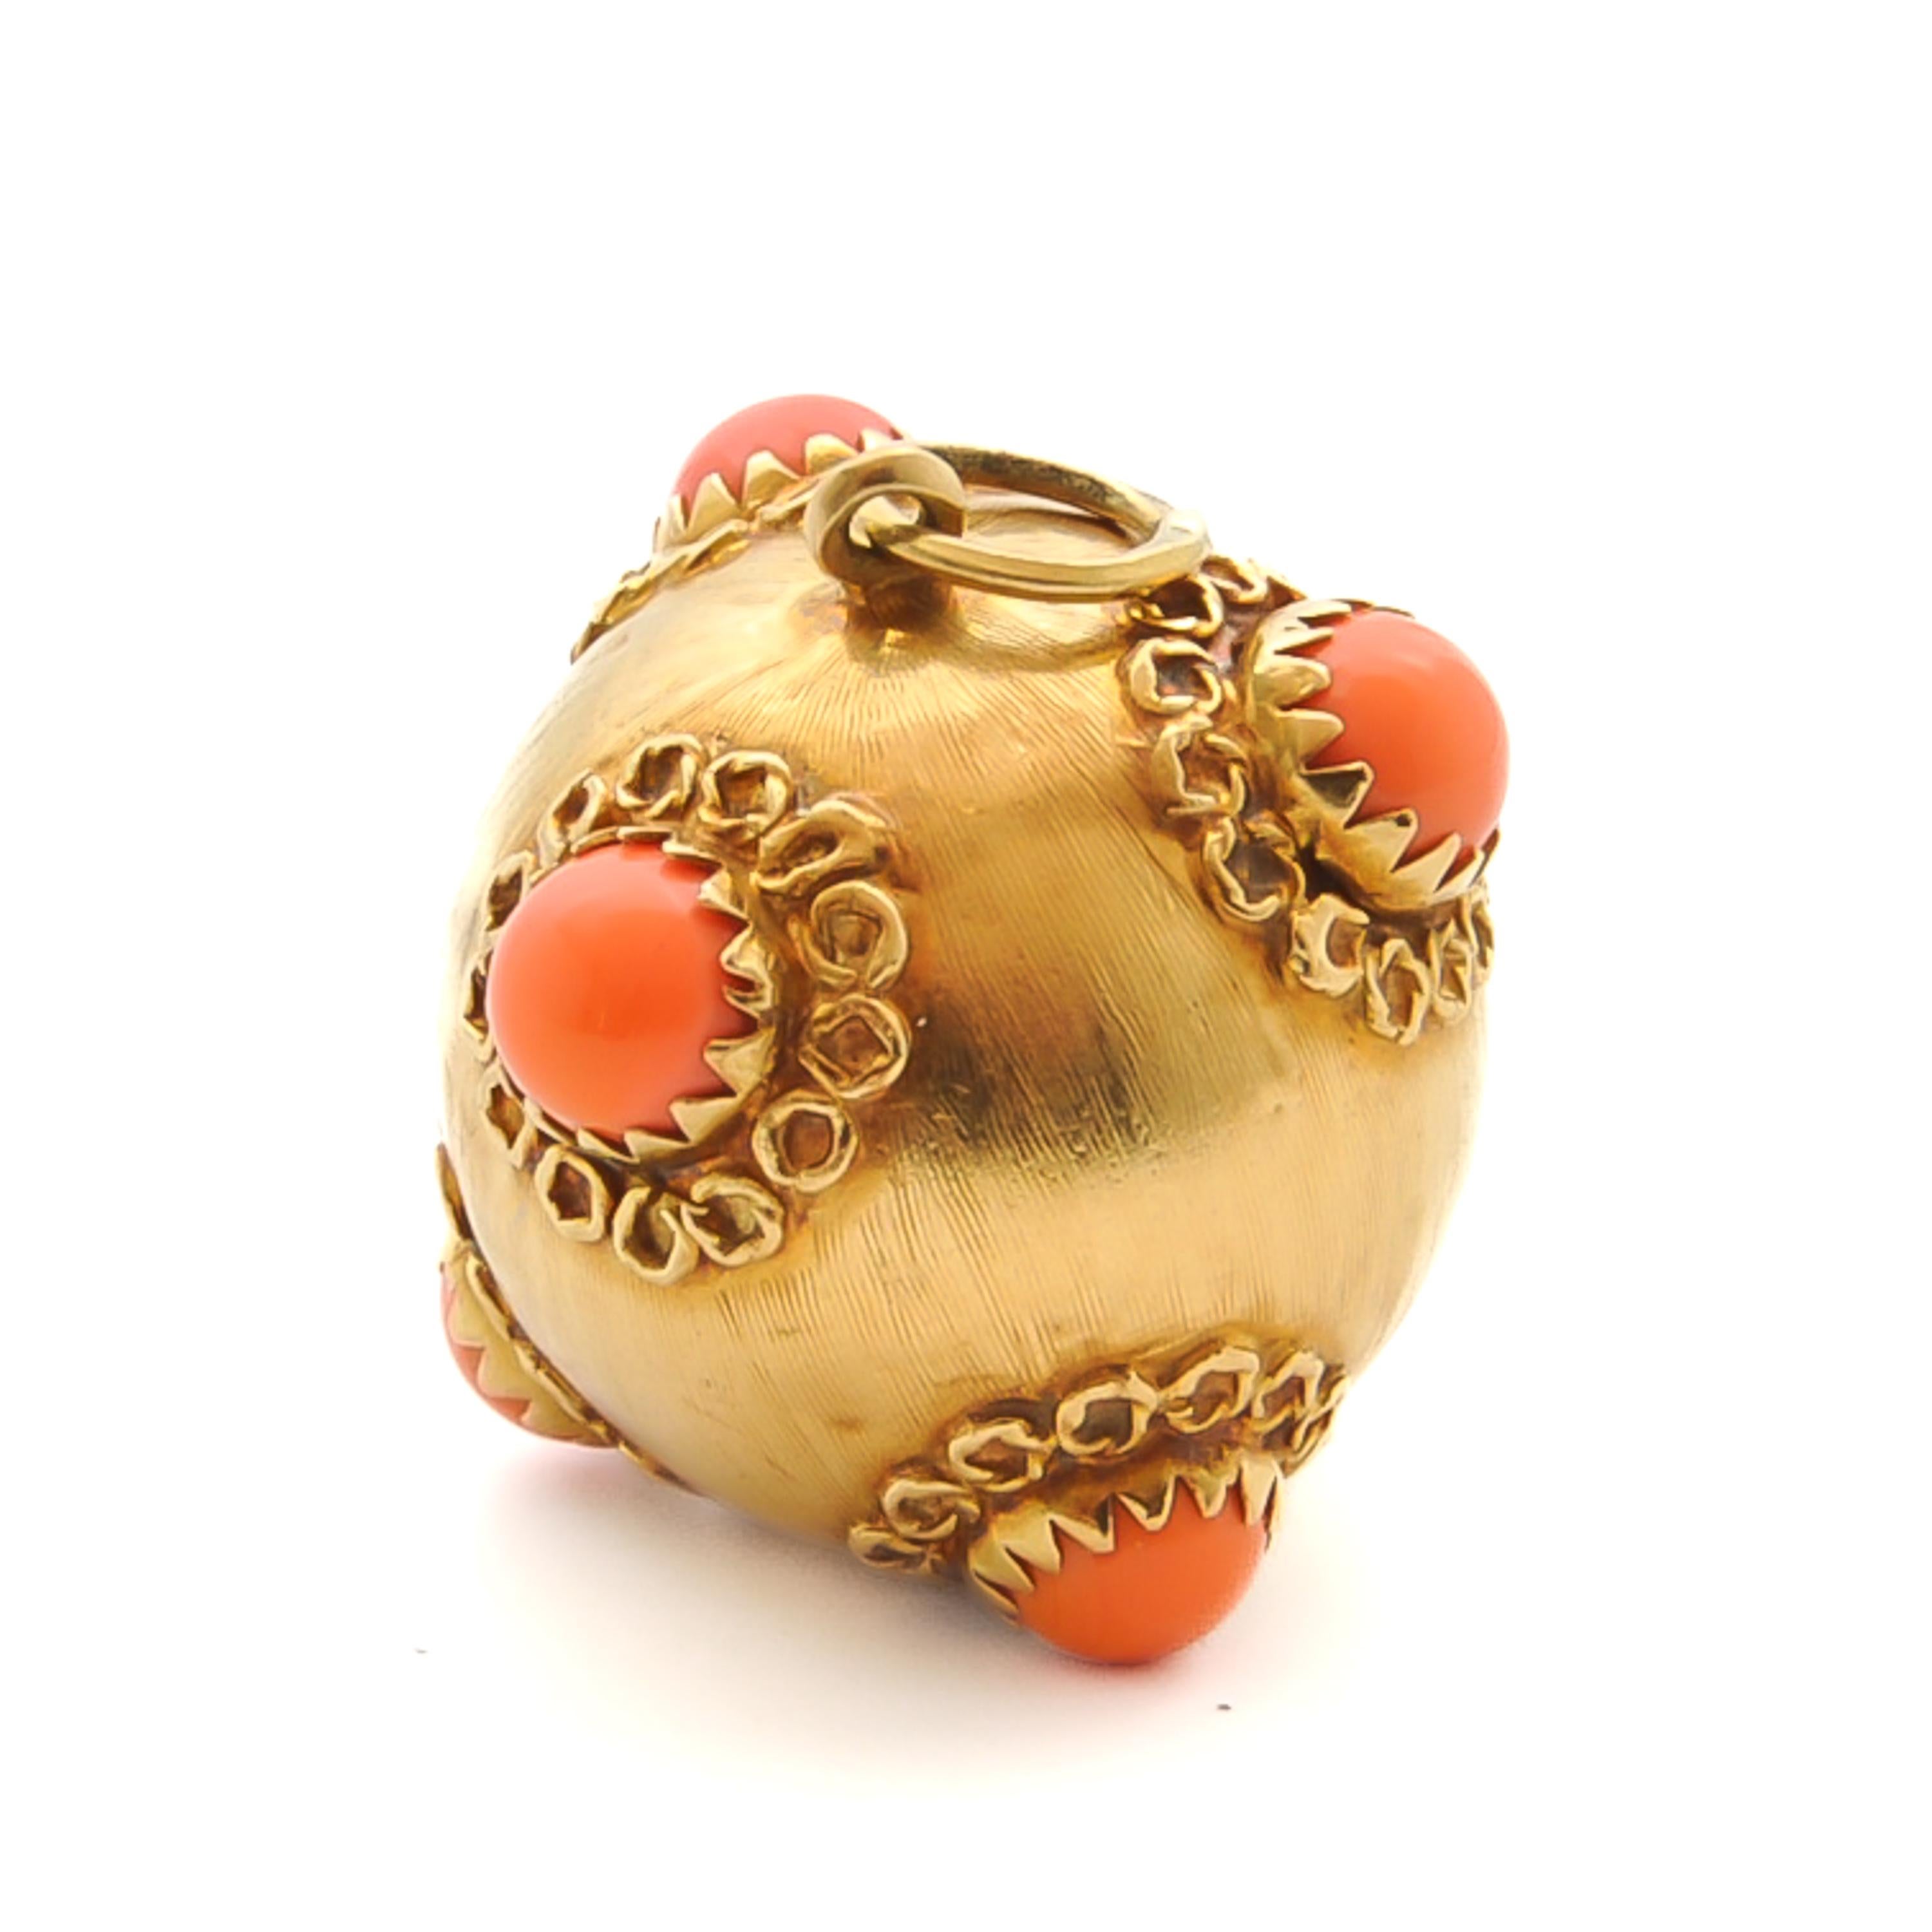 Vintage Venetian Revival 18K Gold and Coral Sputnik Pendant In Good Condition For Sale In Rotterdam, NL